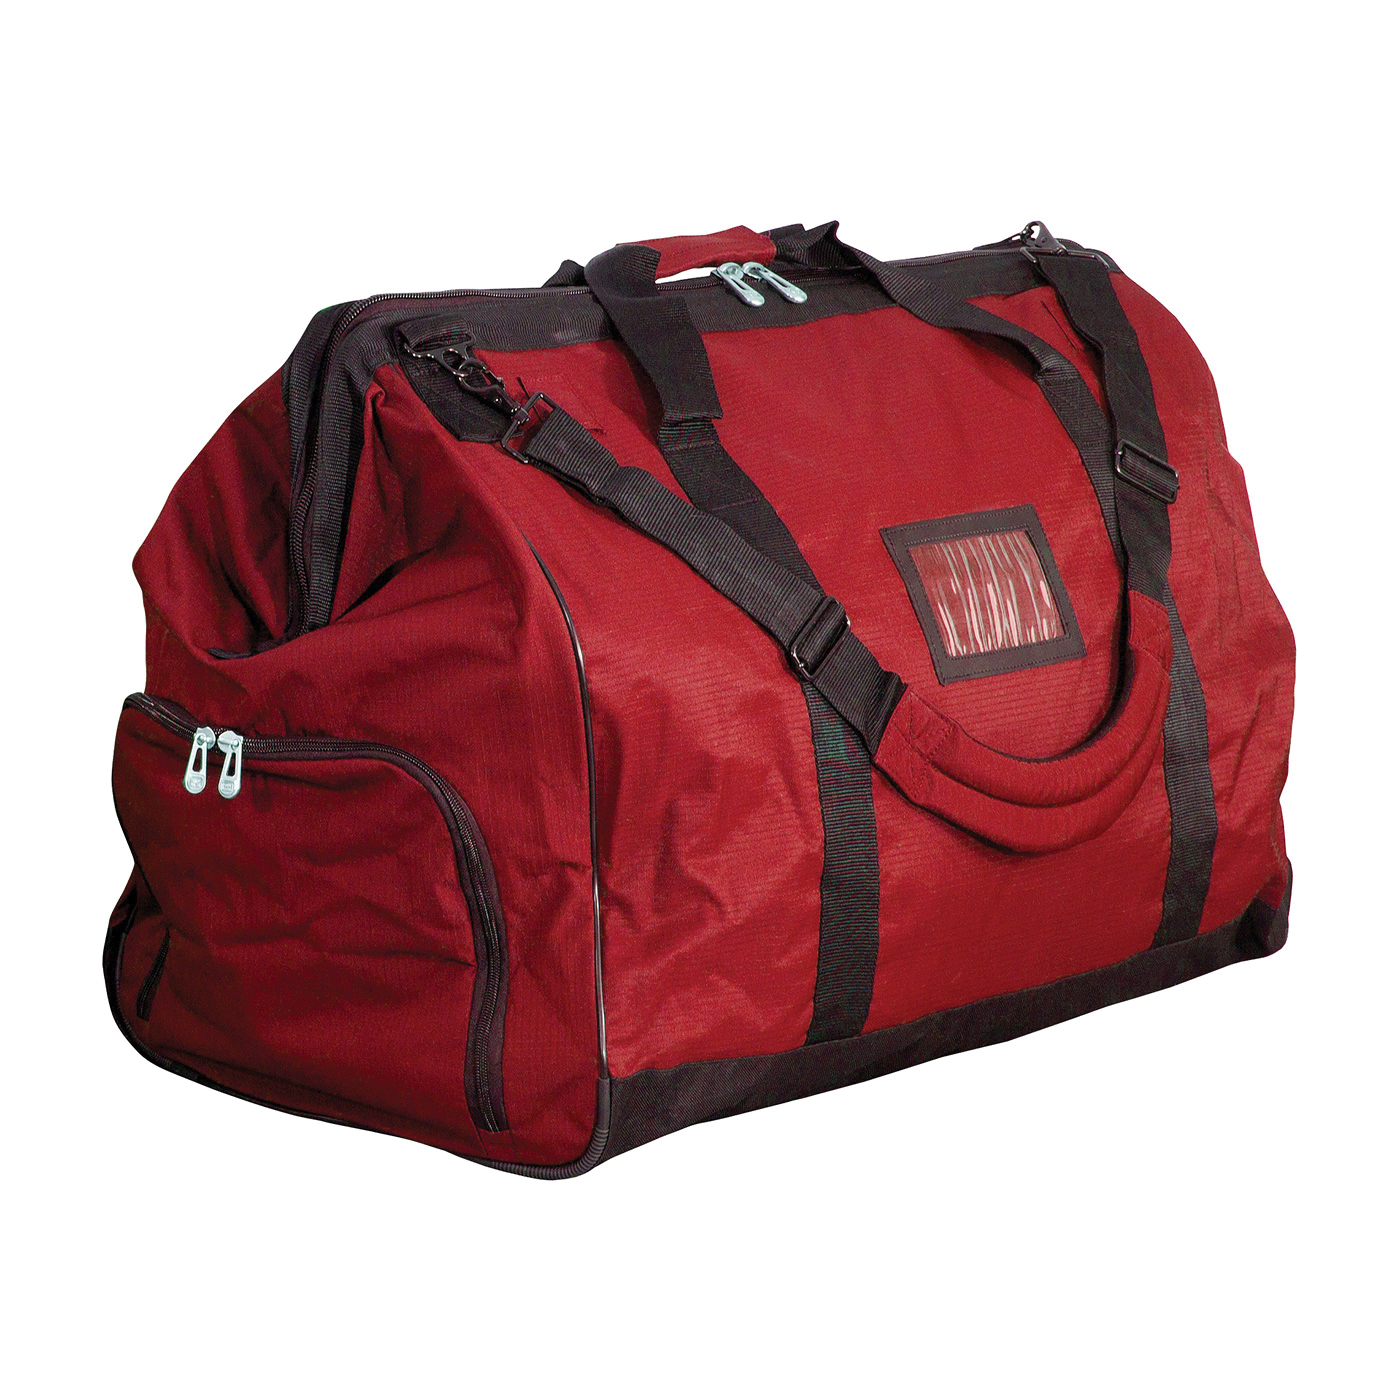 PIP® 903-GB653 Gear Bag With Wheels and Handle, Red, Polyester, 22 in H x 16-1/2 in W x 28 in D